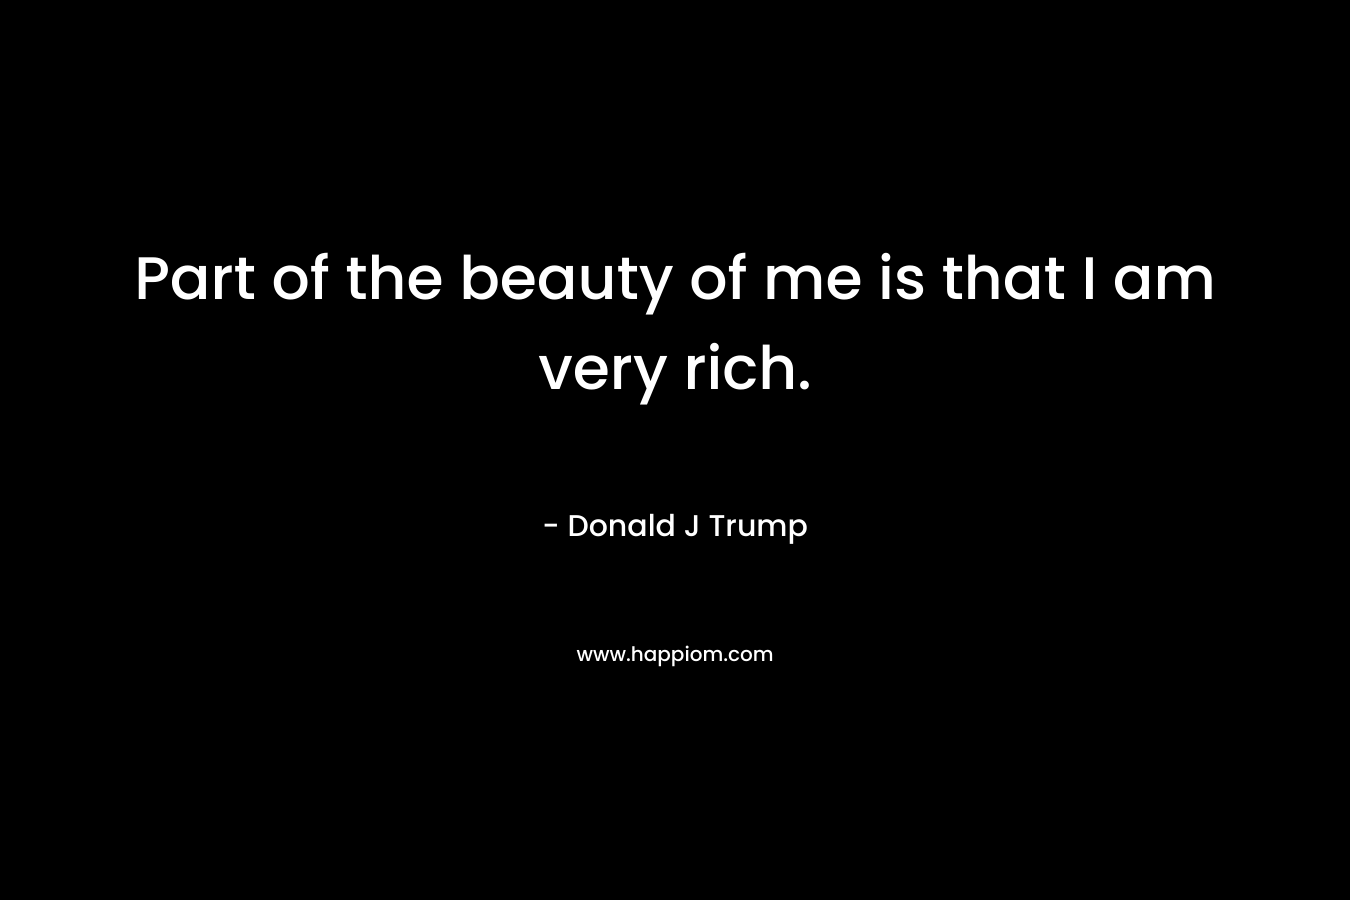 Part of the beauty of me is that I am very rich.